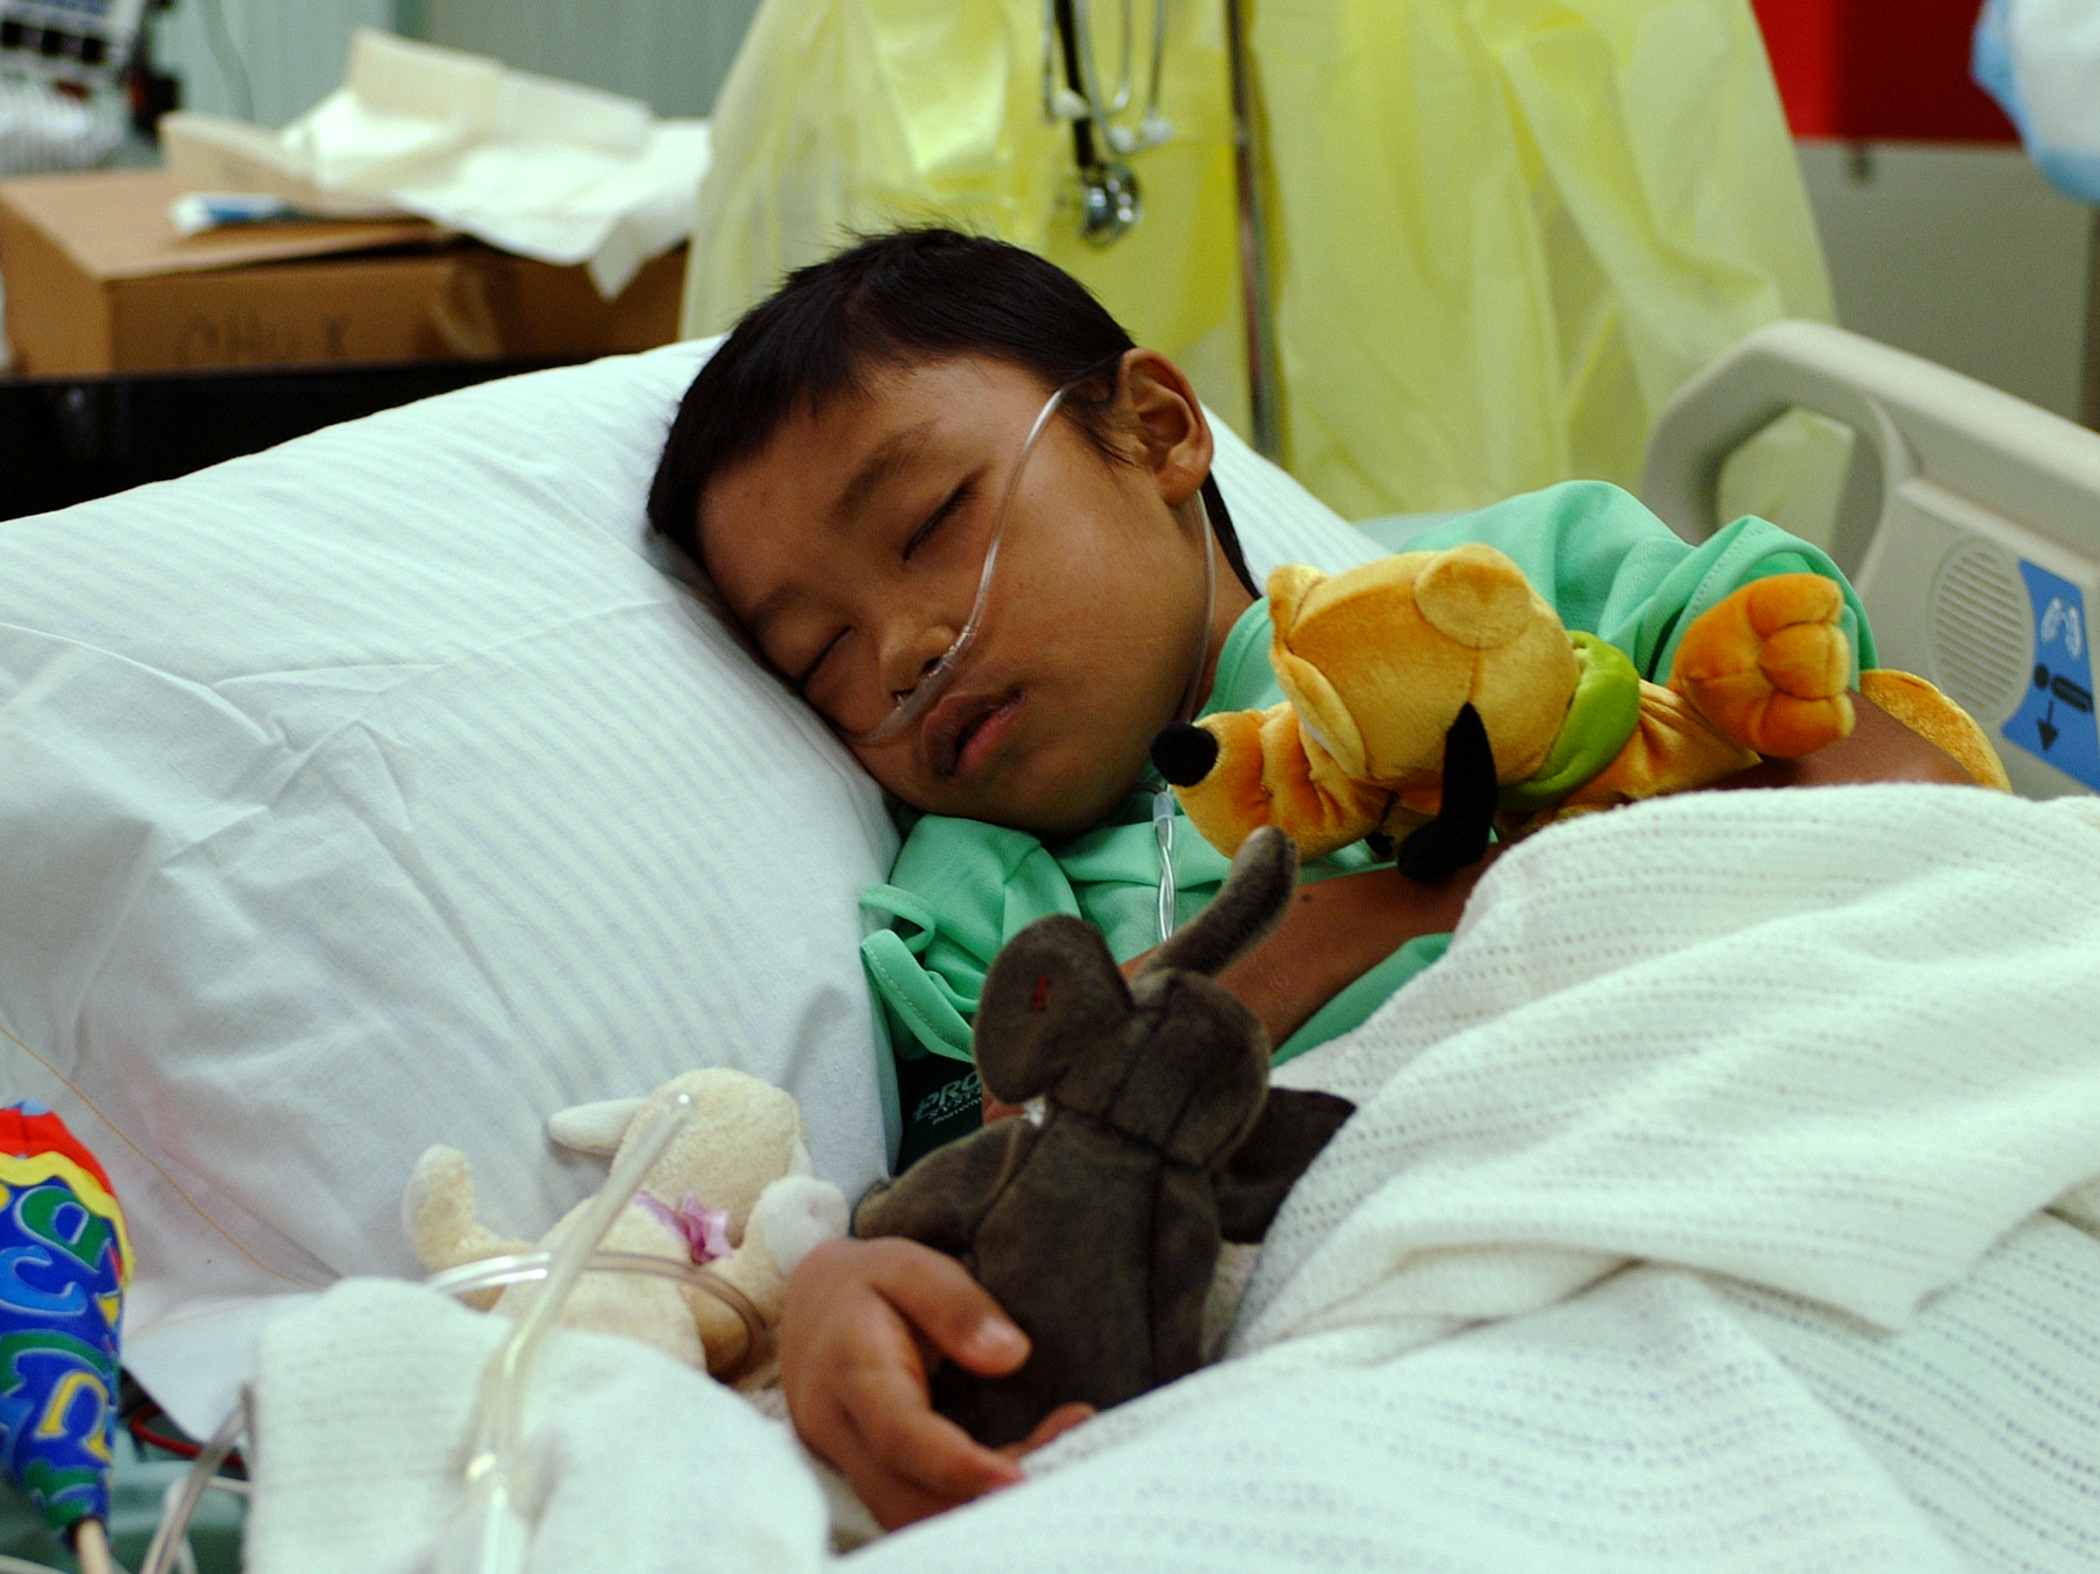 US Navy 050214-N-0357S-060 An 11-year old Indonesian boy rests in a hospital bed in the Intensive Care Unit aboard the Military Sealift Command (MSC) hospital ship USNS Mercy (T-AH 19)